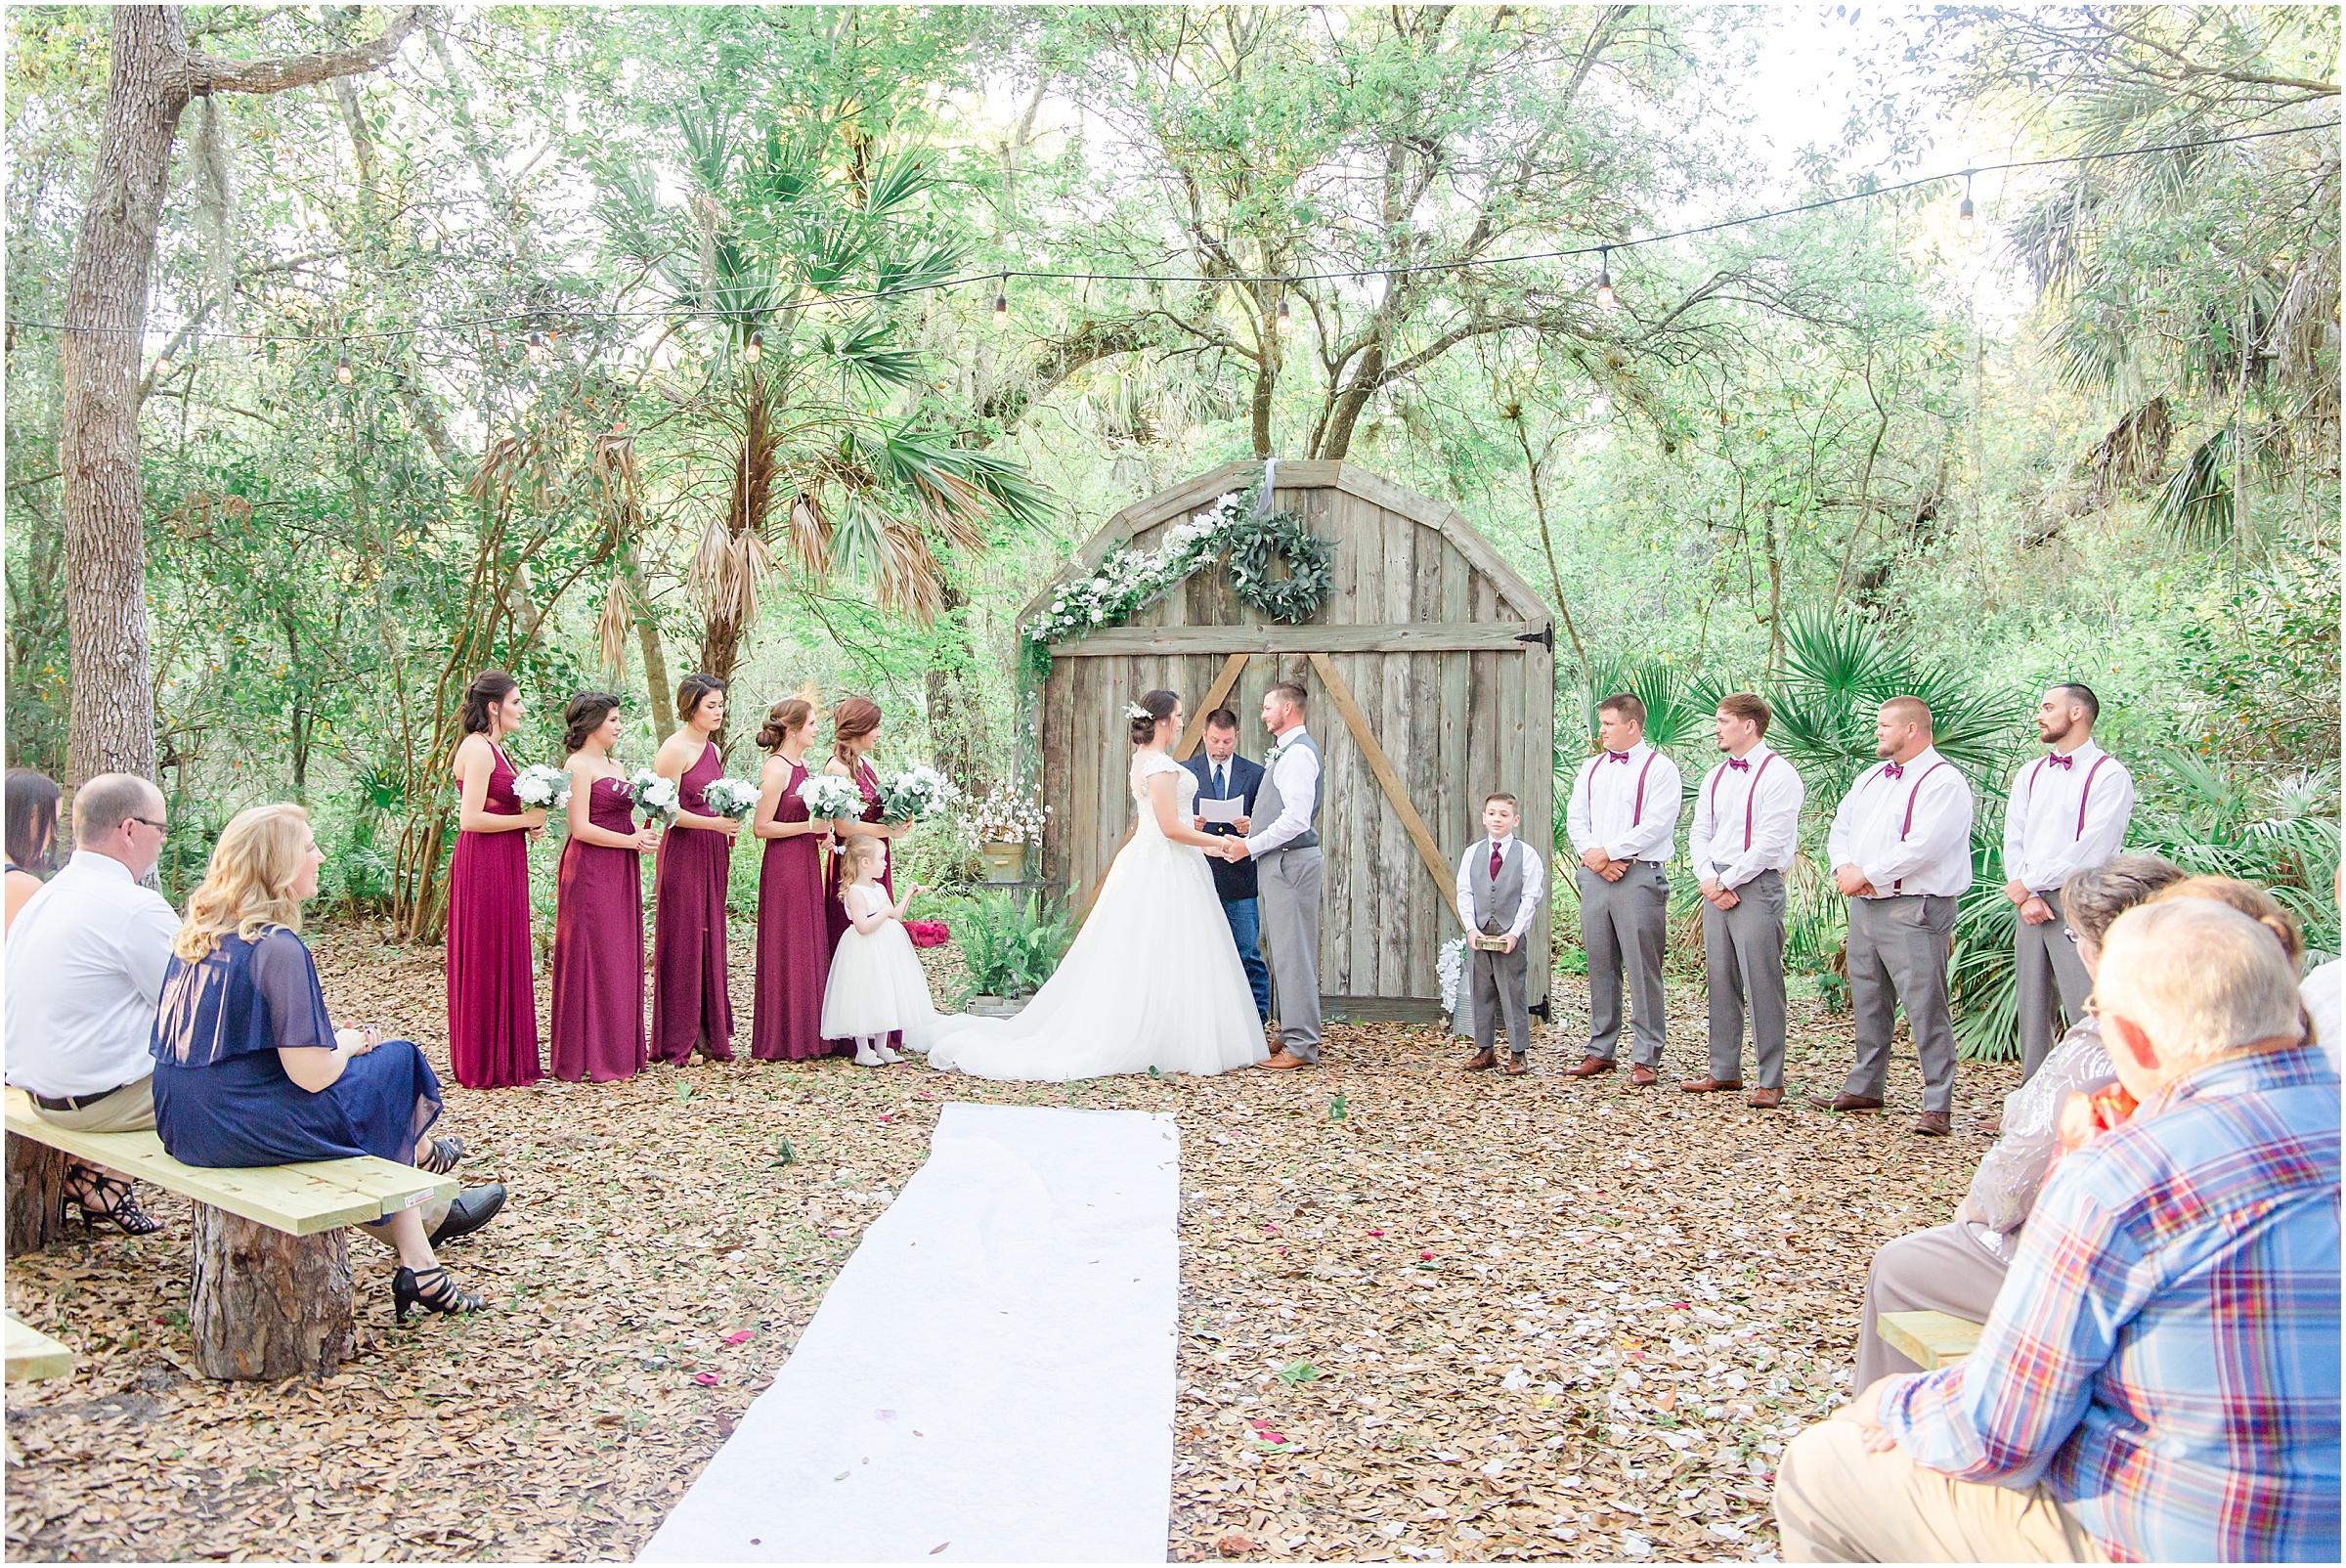 Blog post about why you should consider an unplugged ceremony